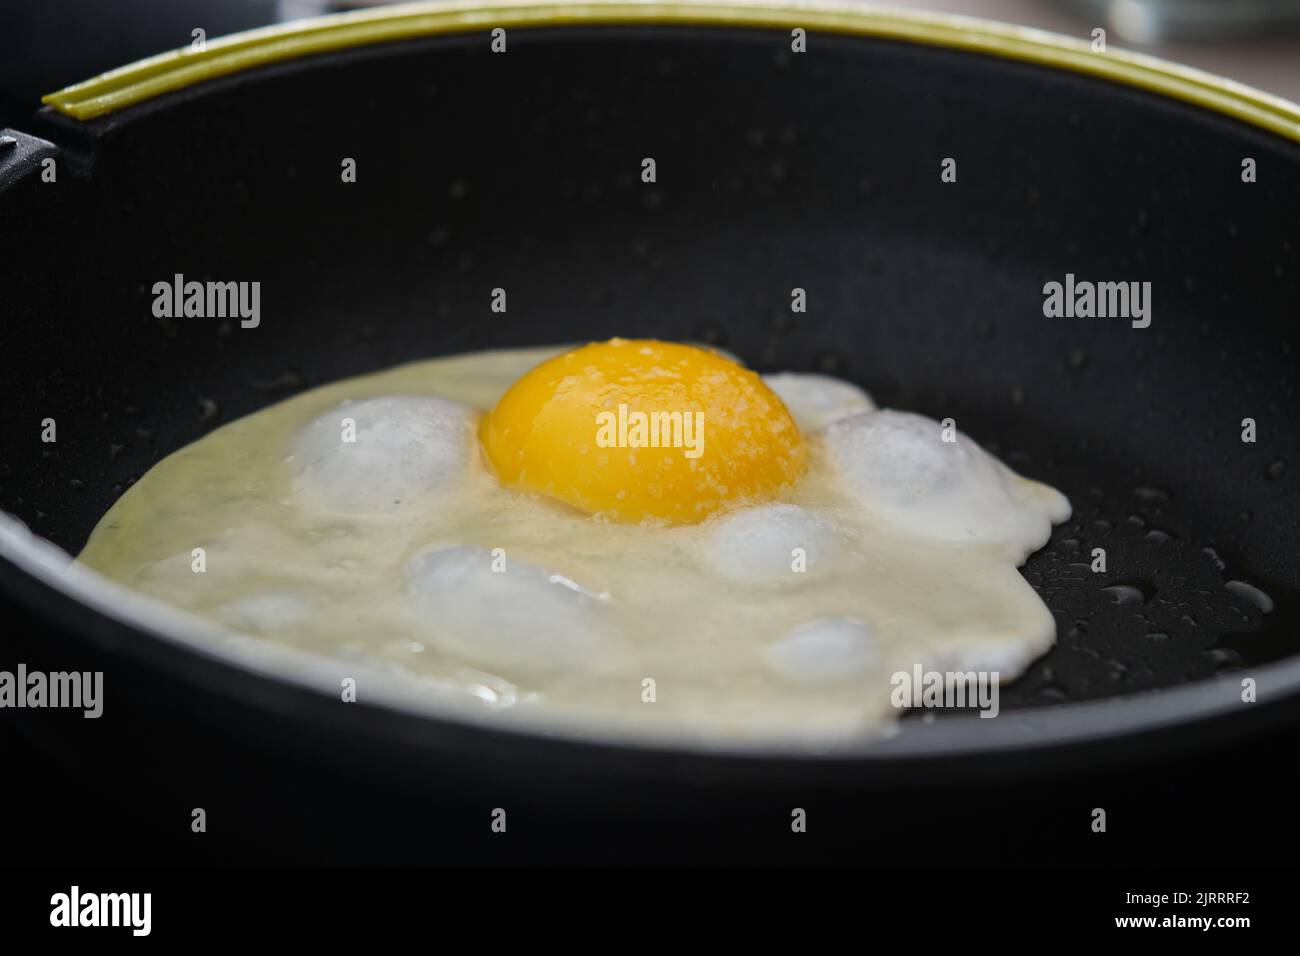 Frying egg in a cooking pan. Stock Photo